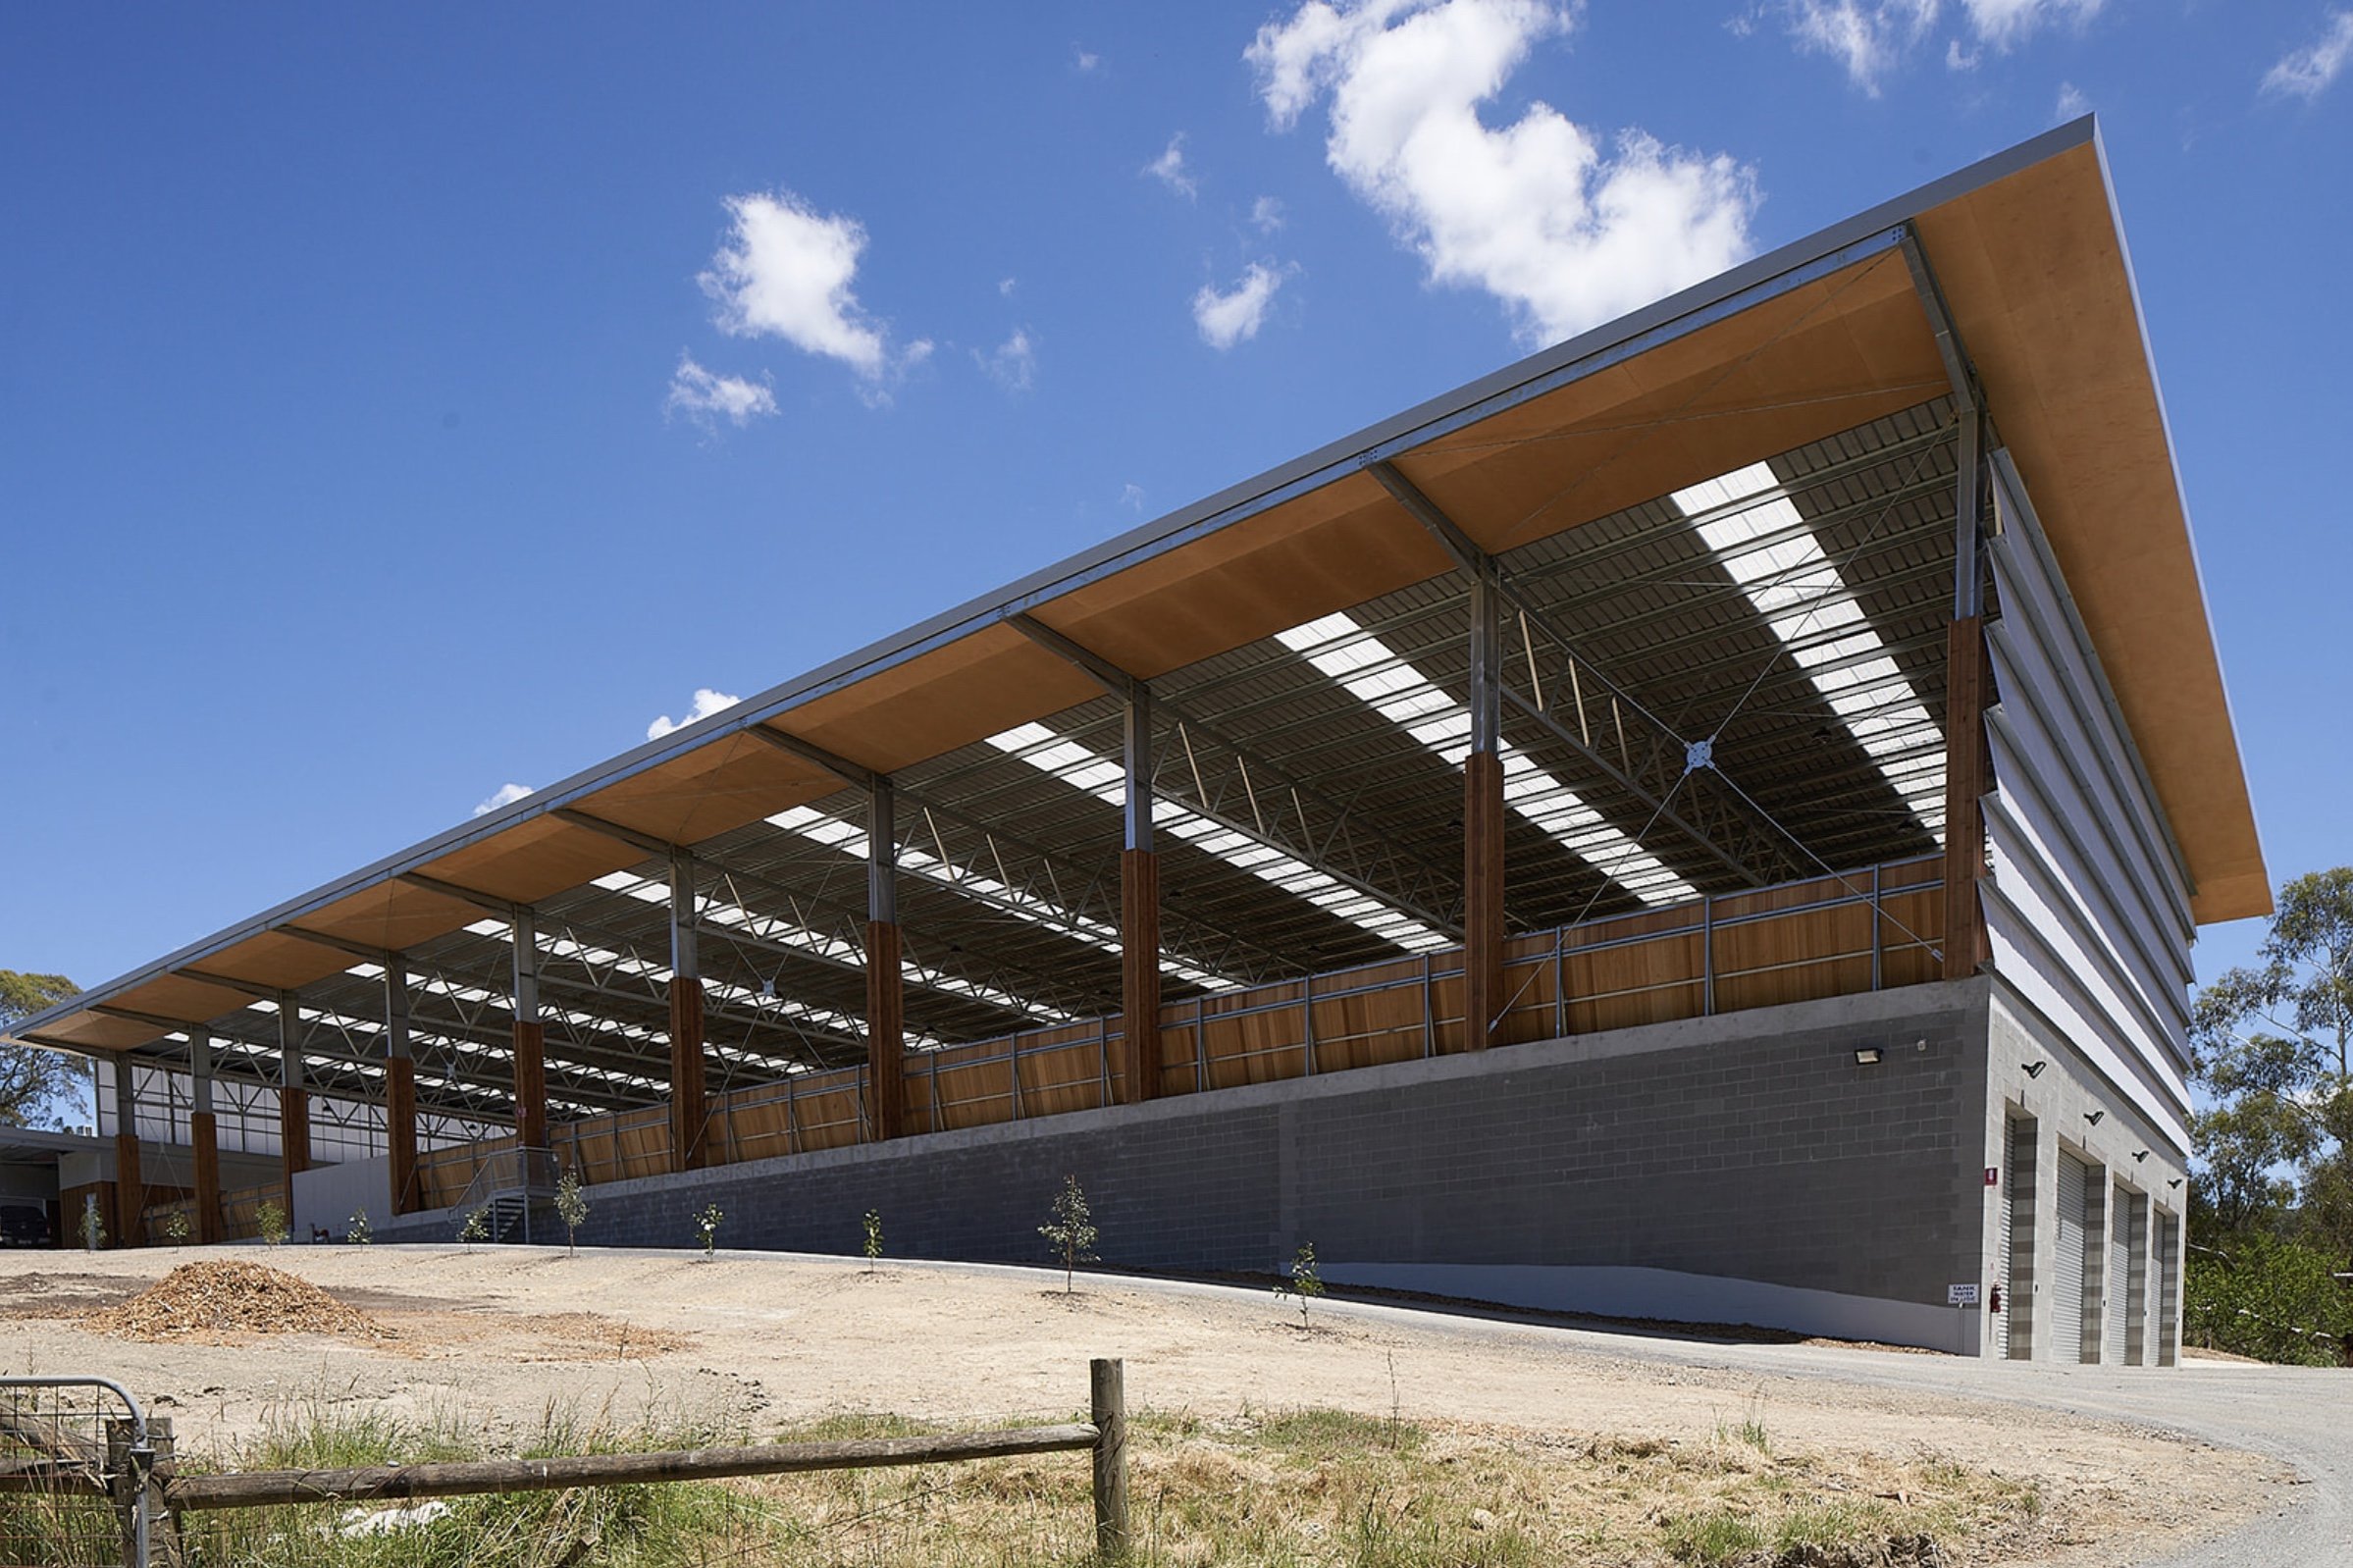 covered outdoor stable arena, featuring a protected space for horses to exercise and train, shielded from the elements